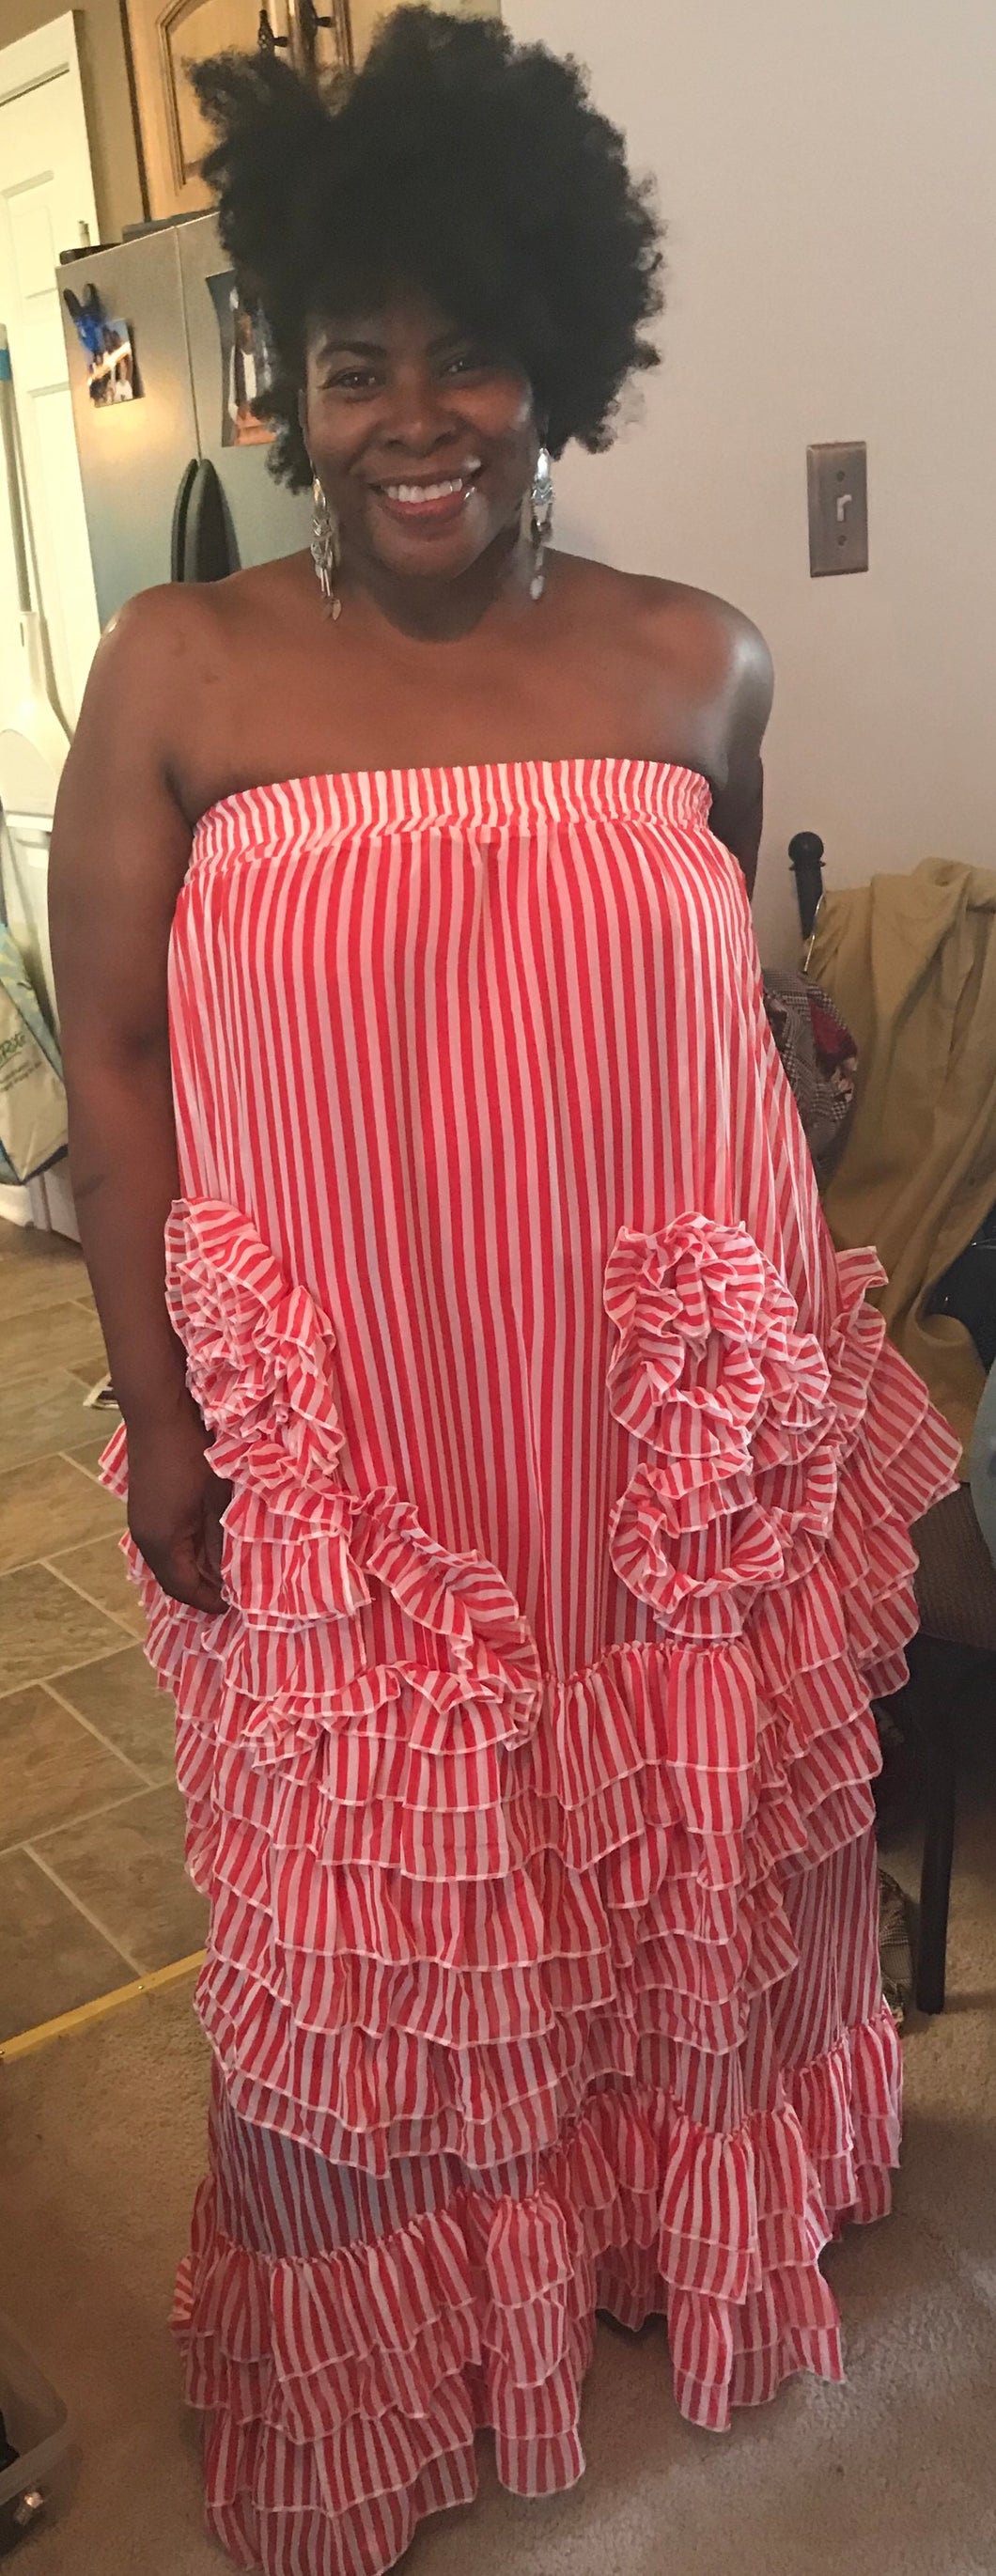 Red and White Pin Stripe Maxi Skirt /Top - SistahGirl